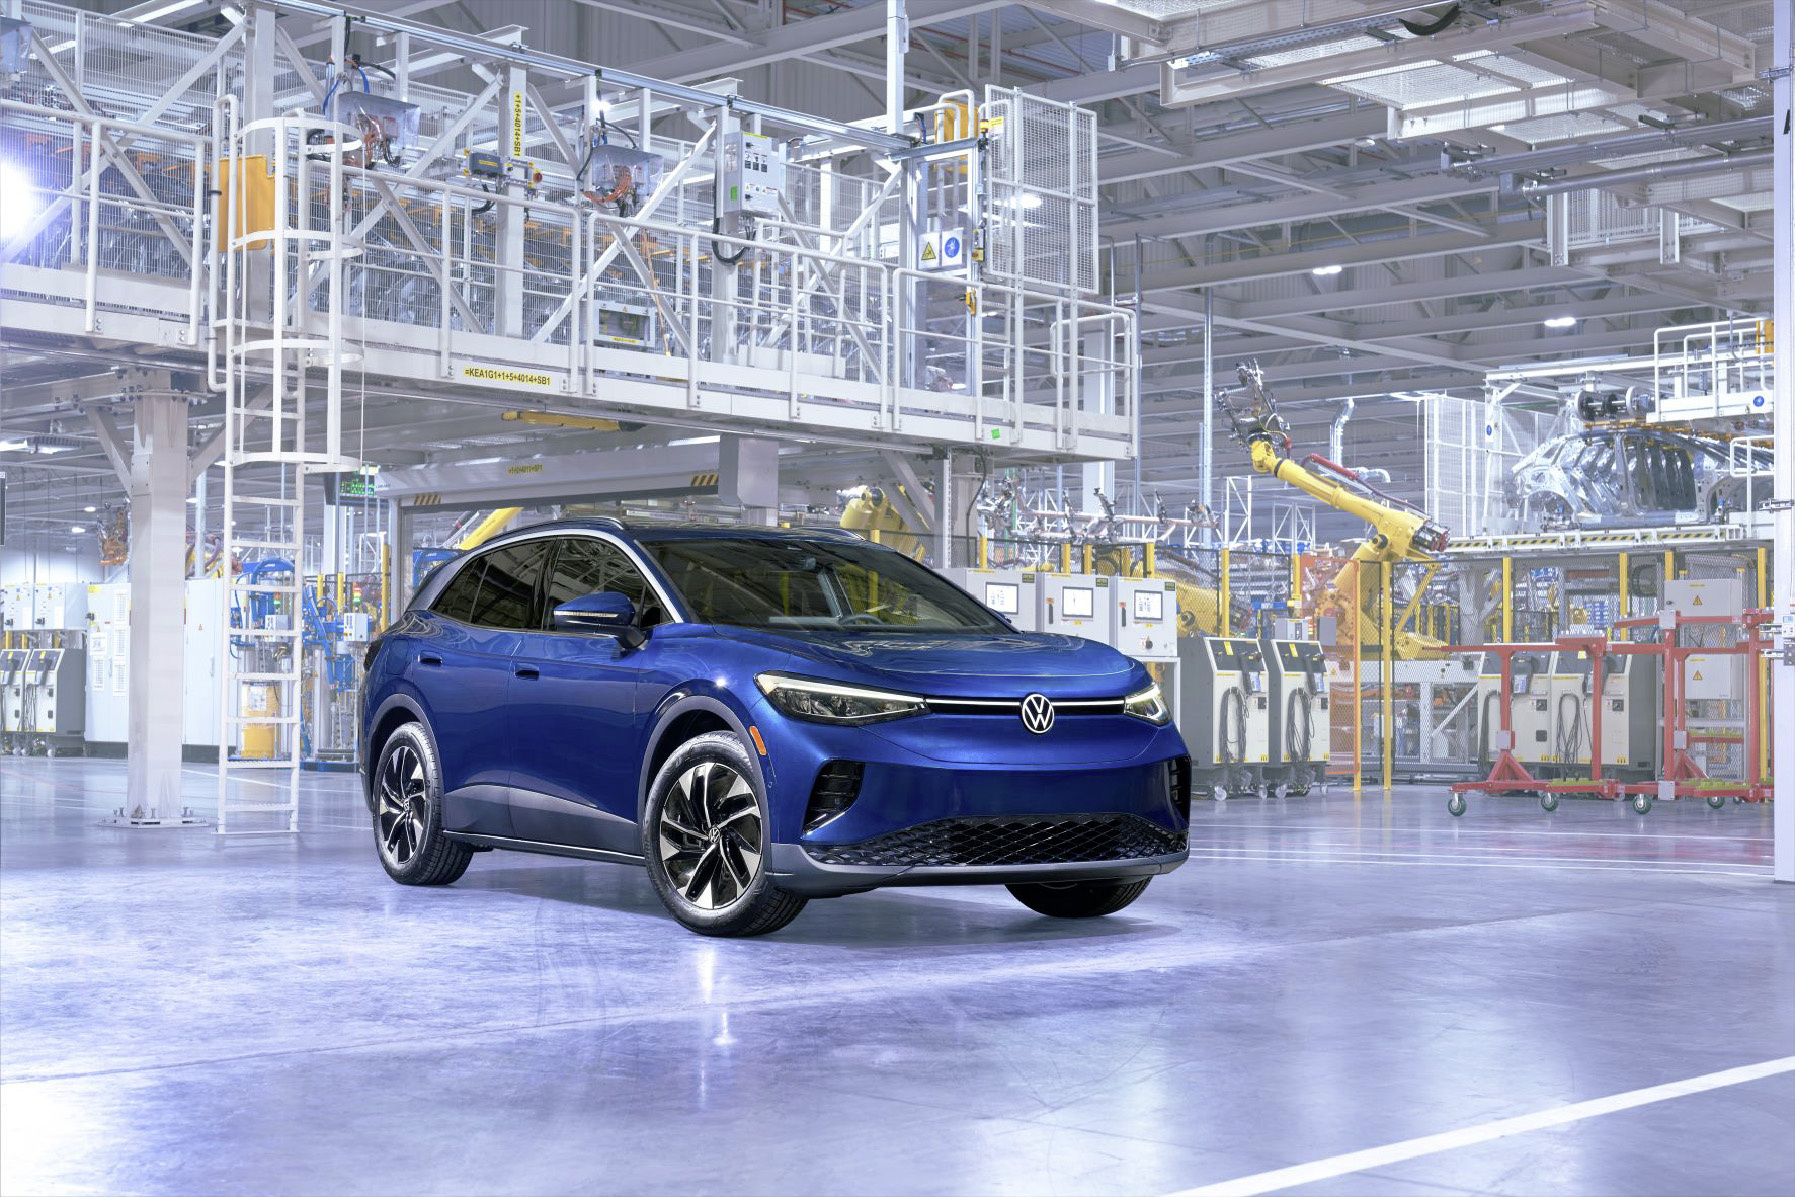 Volkswagen starts U.S. assembly of all-electric ID.4 flagship in